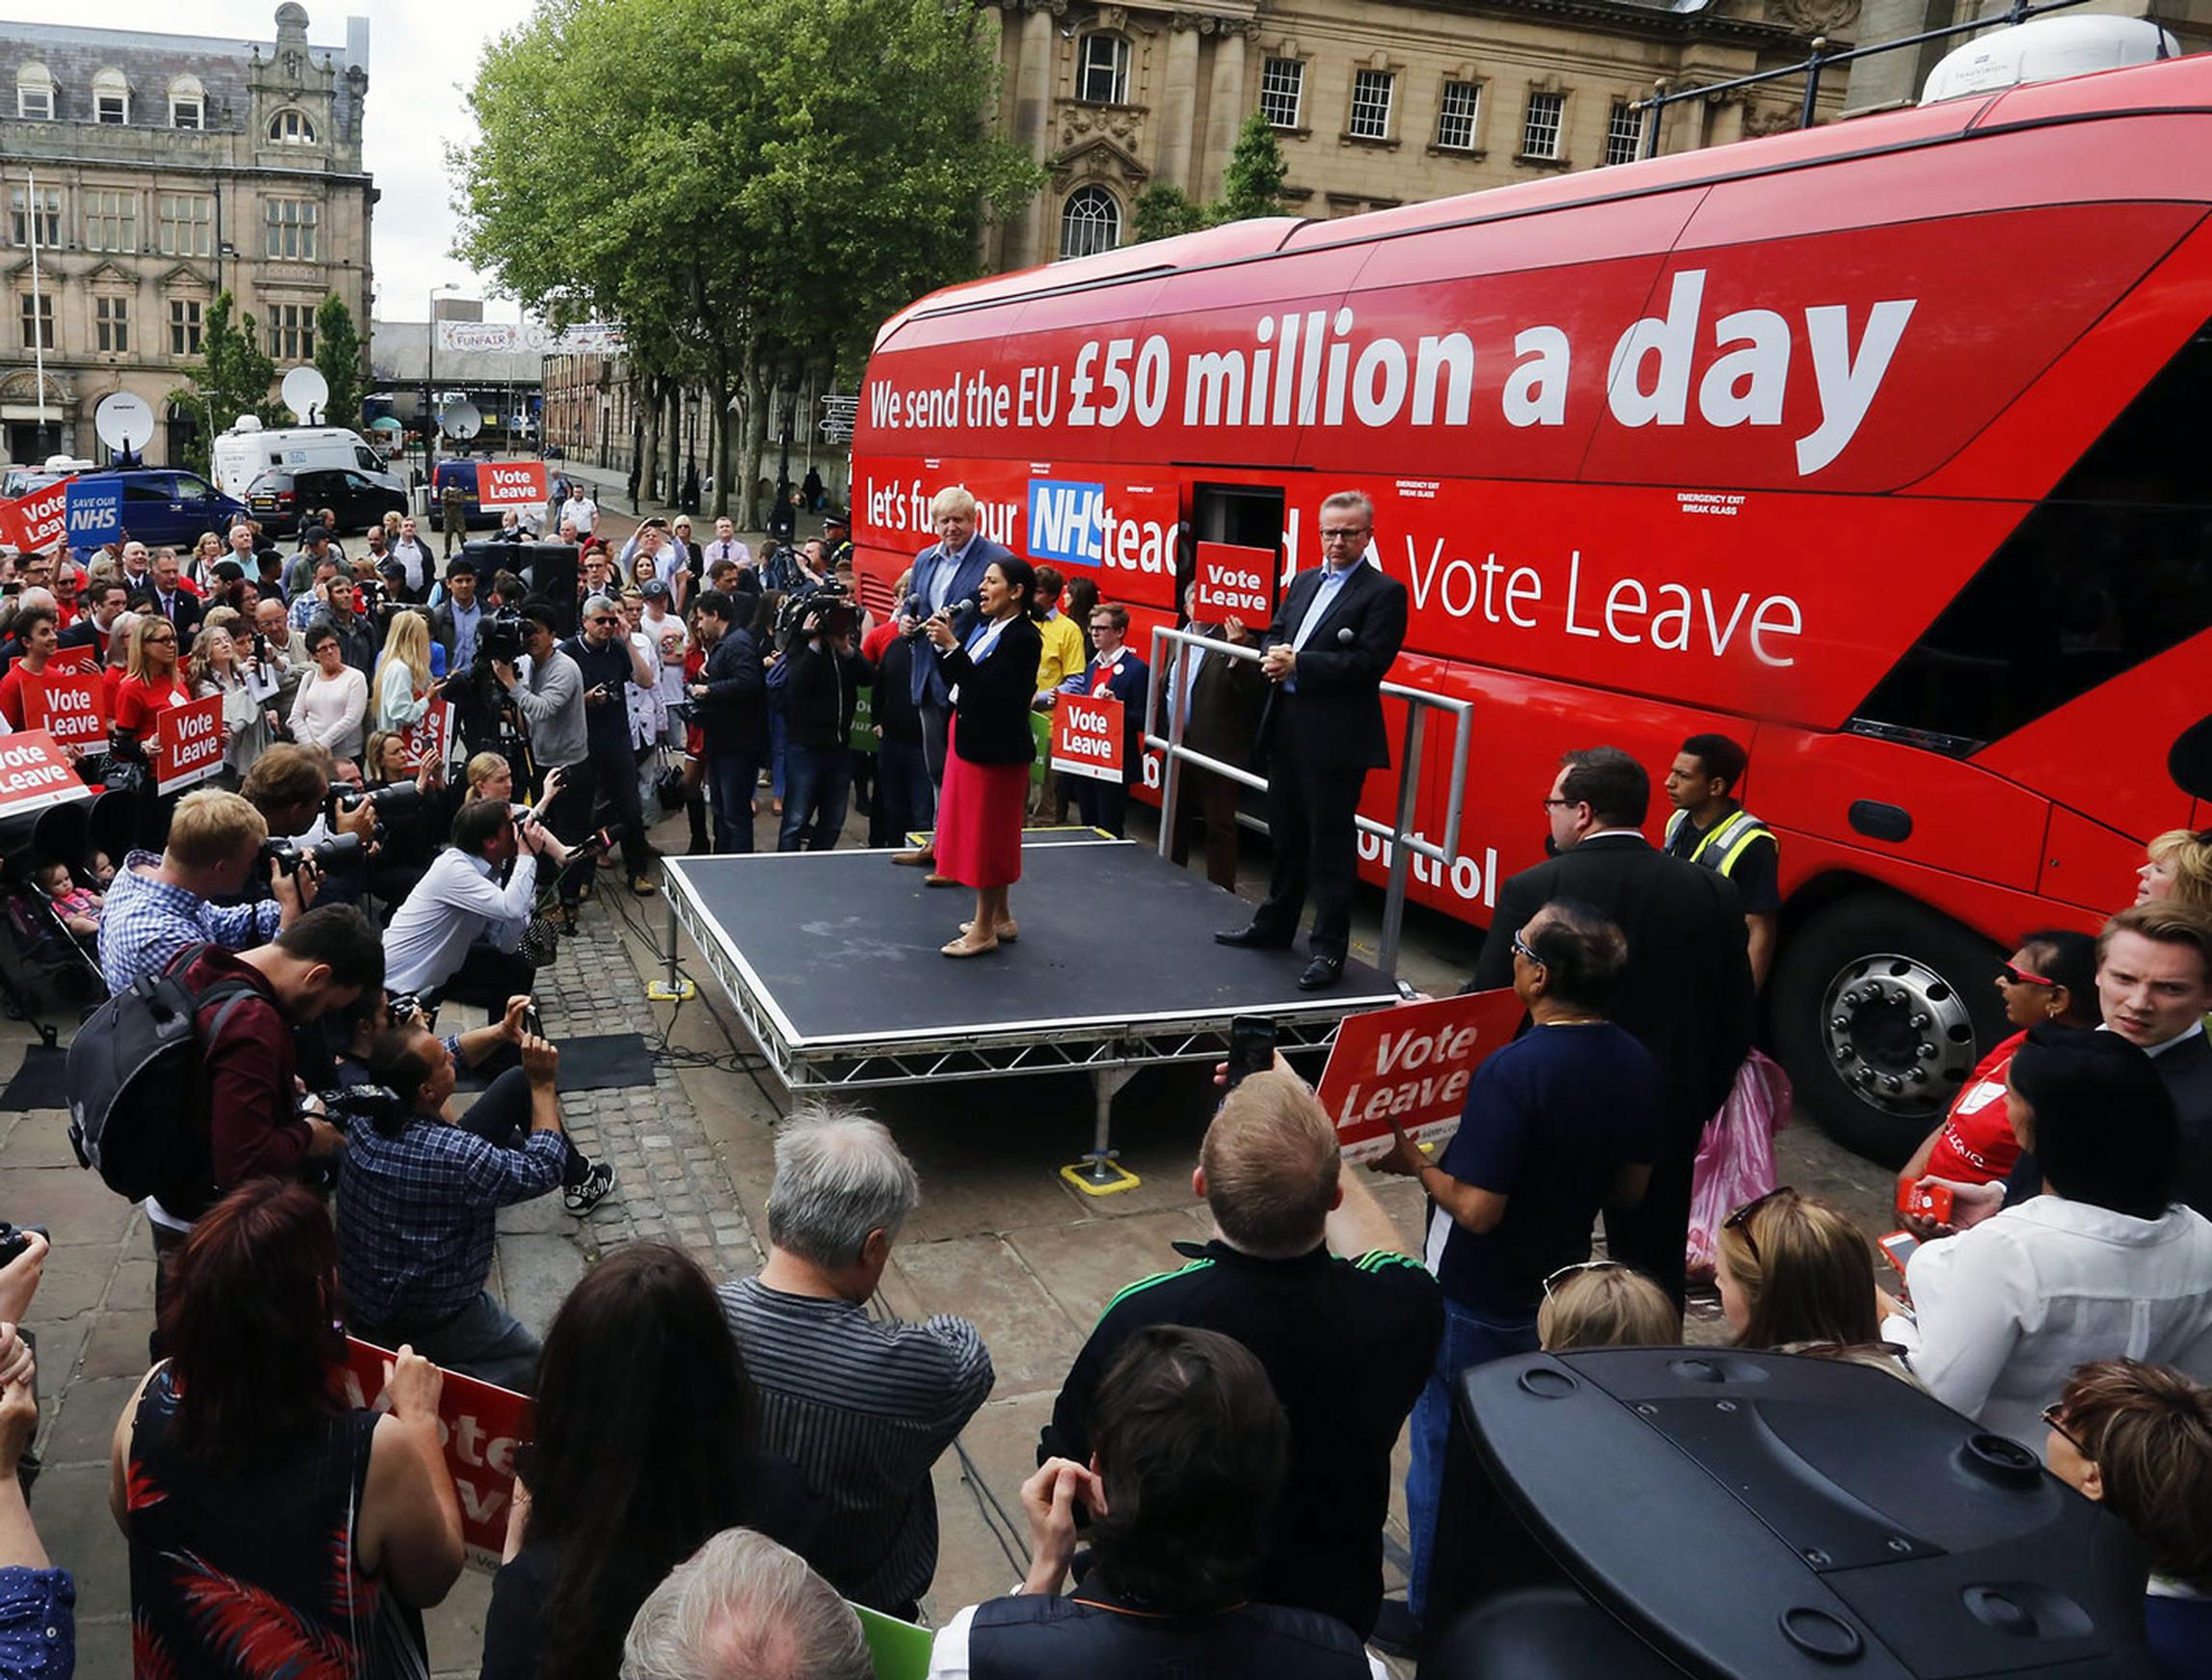 The `Vote Leave` bus